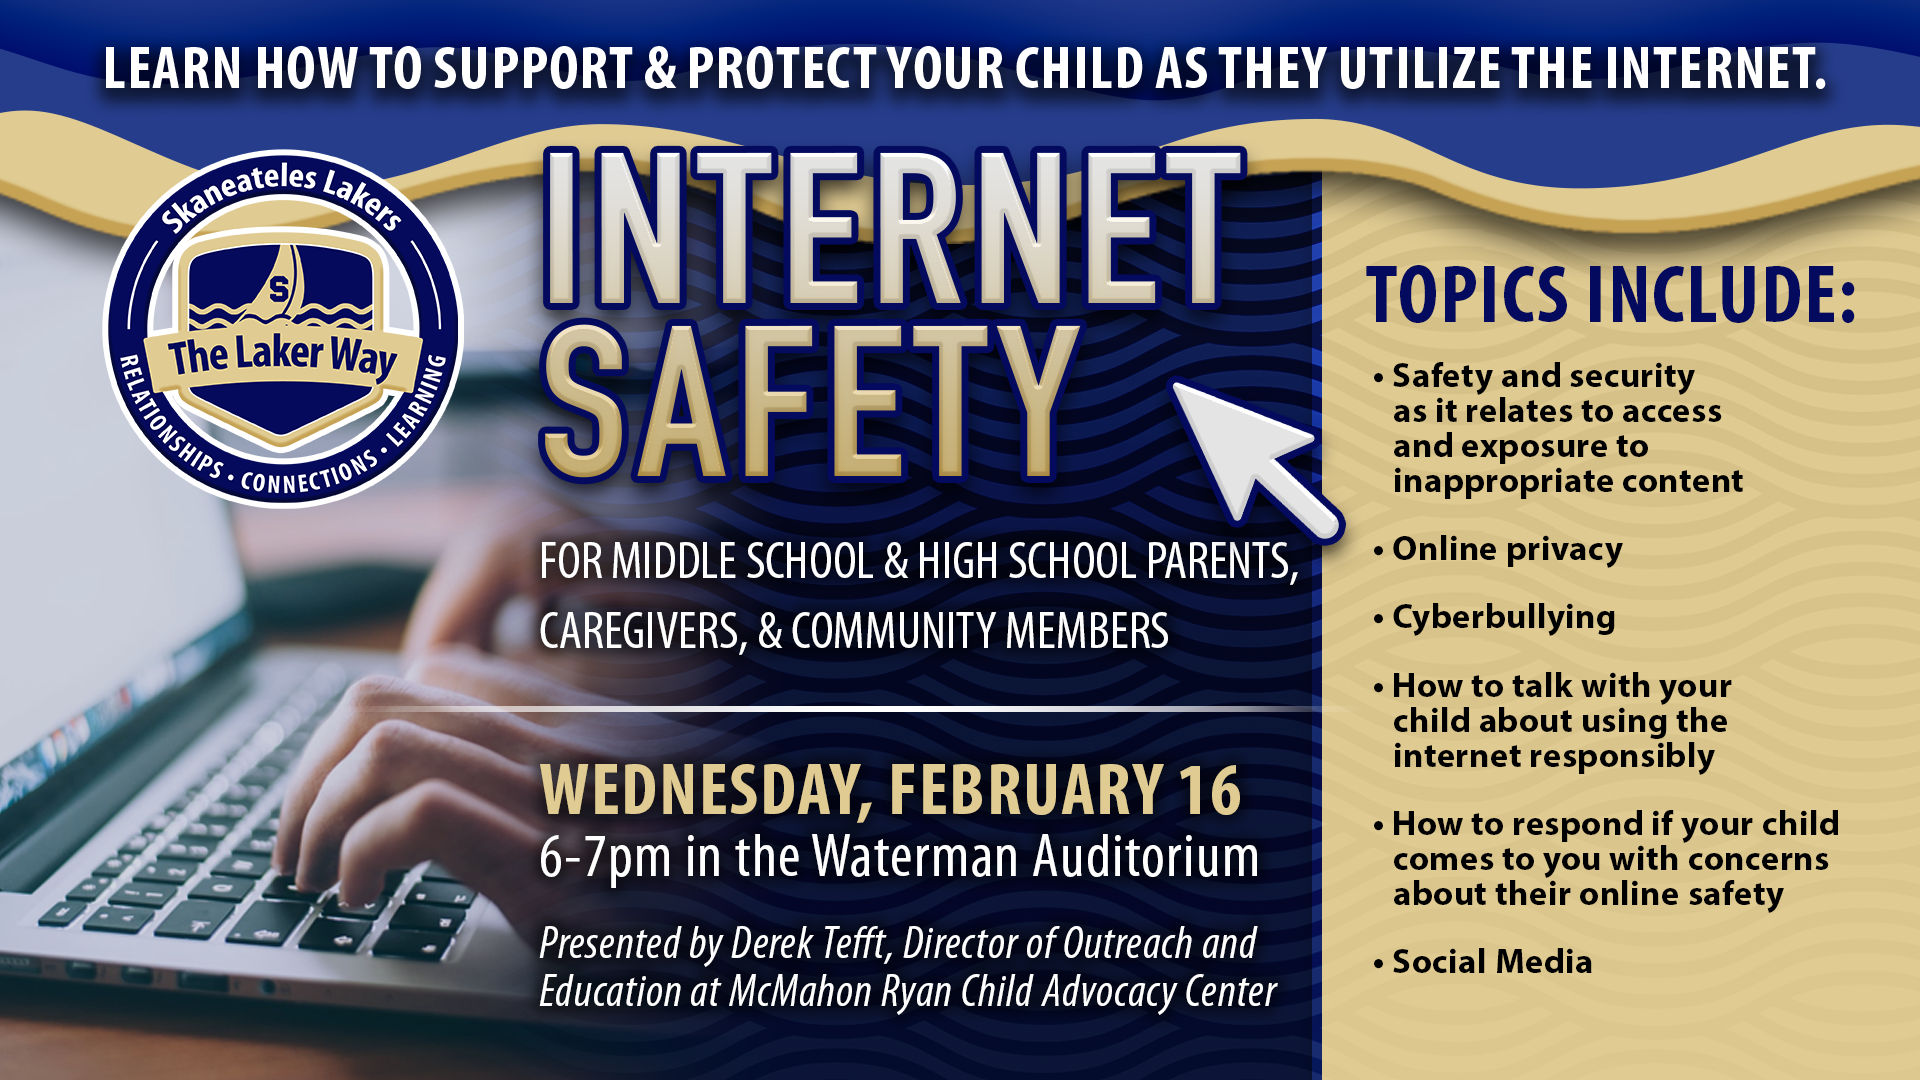 Internet Safety for Middle School and High School Parents